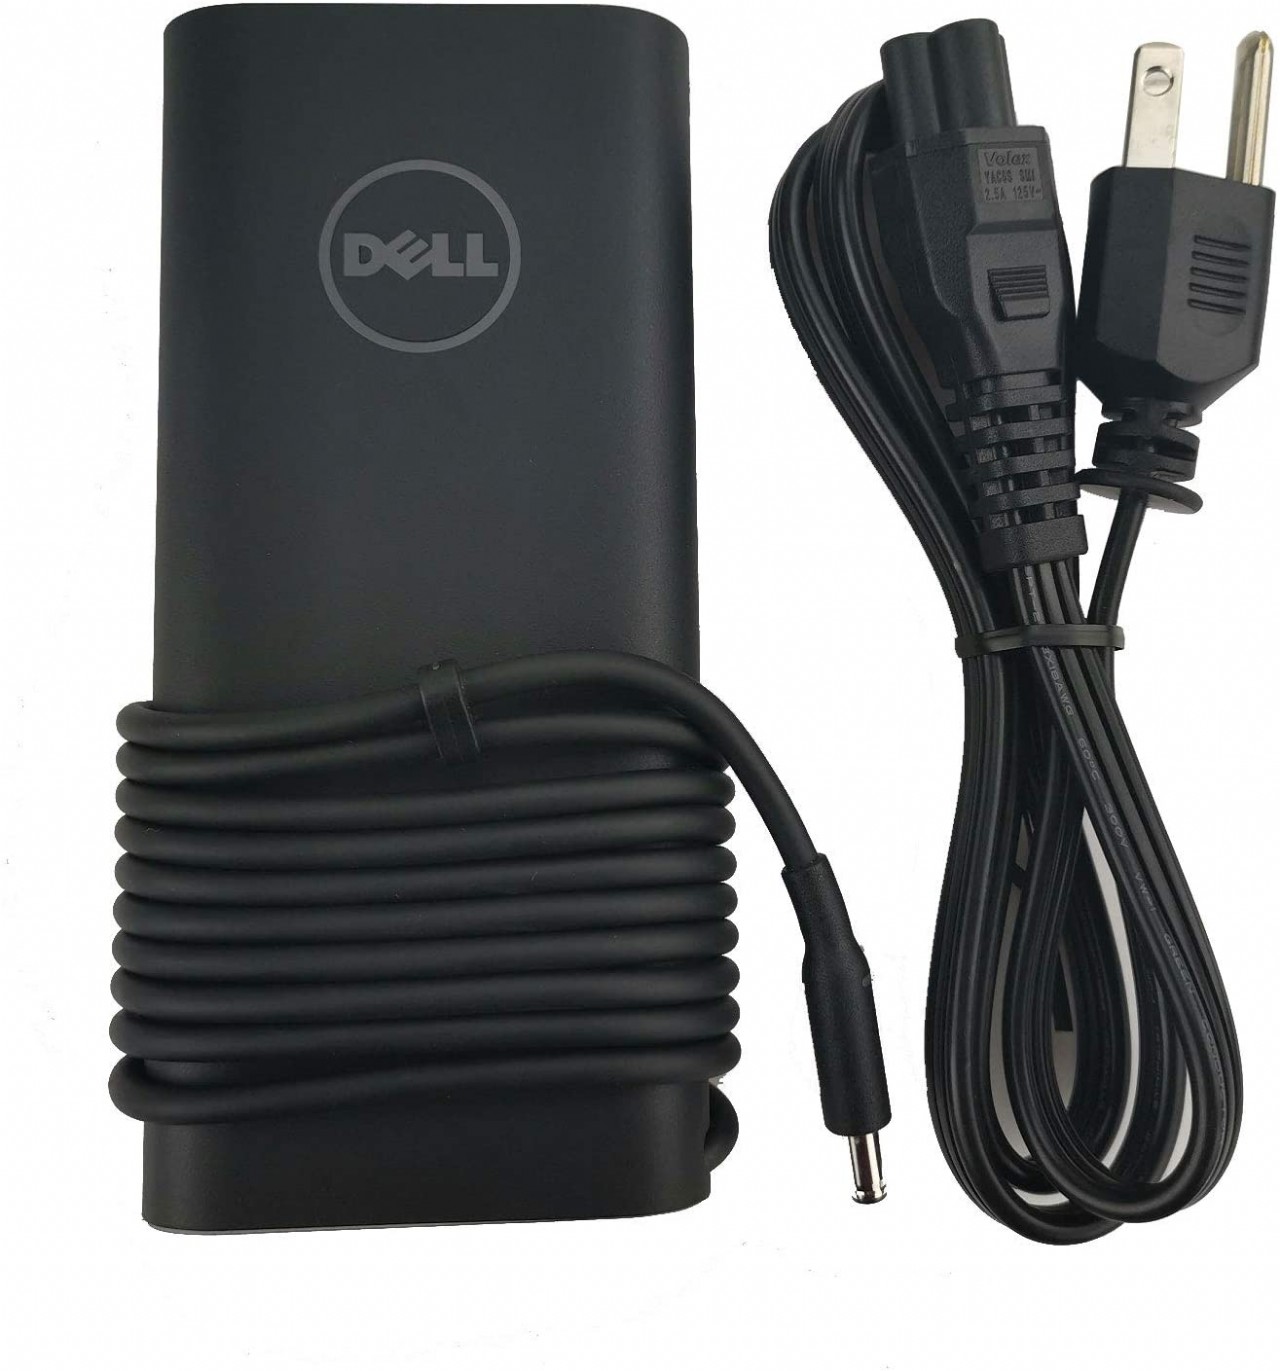 Dell Original XPS 15 Laptop Charger 130W(watt) AC Power Adapter(Power Supply) with 3 Prong Power